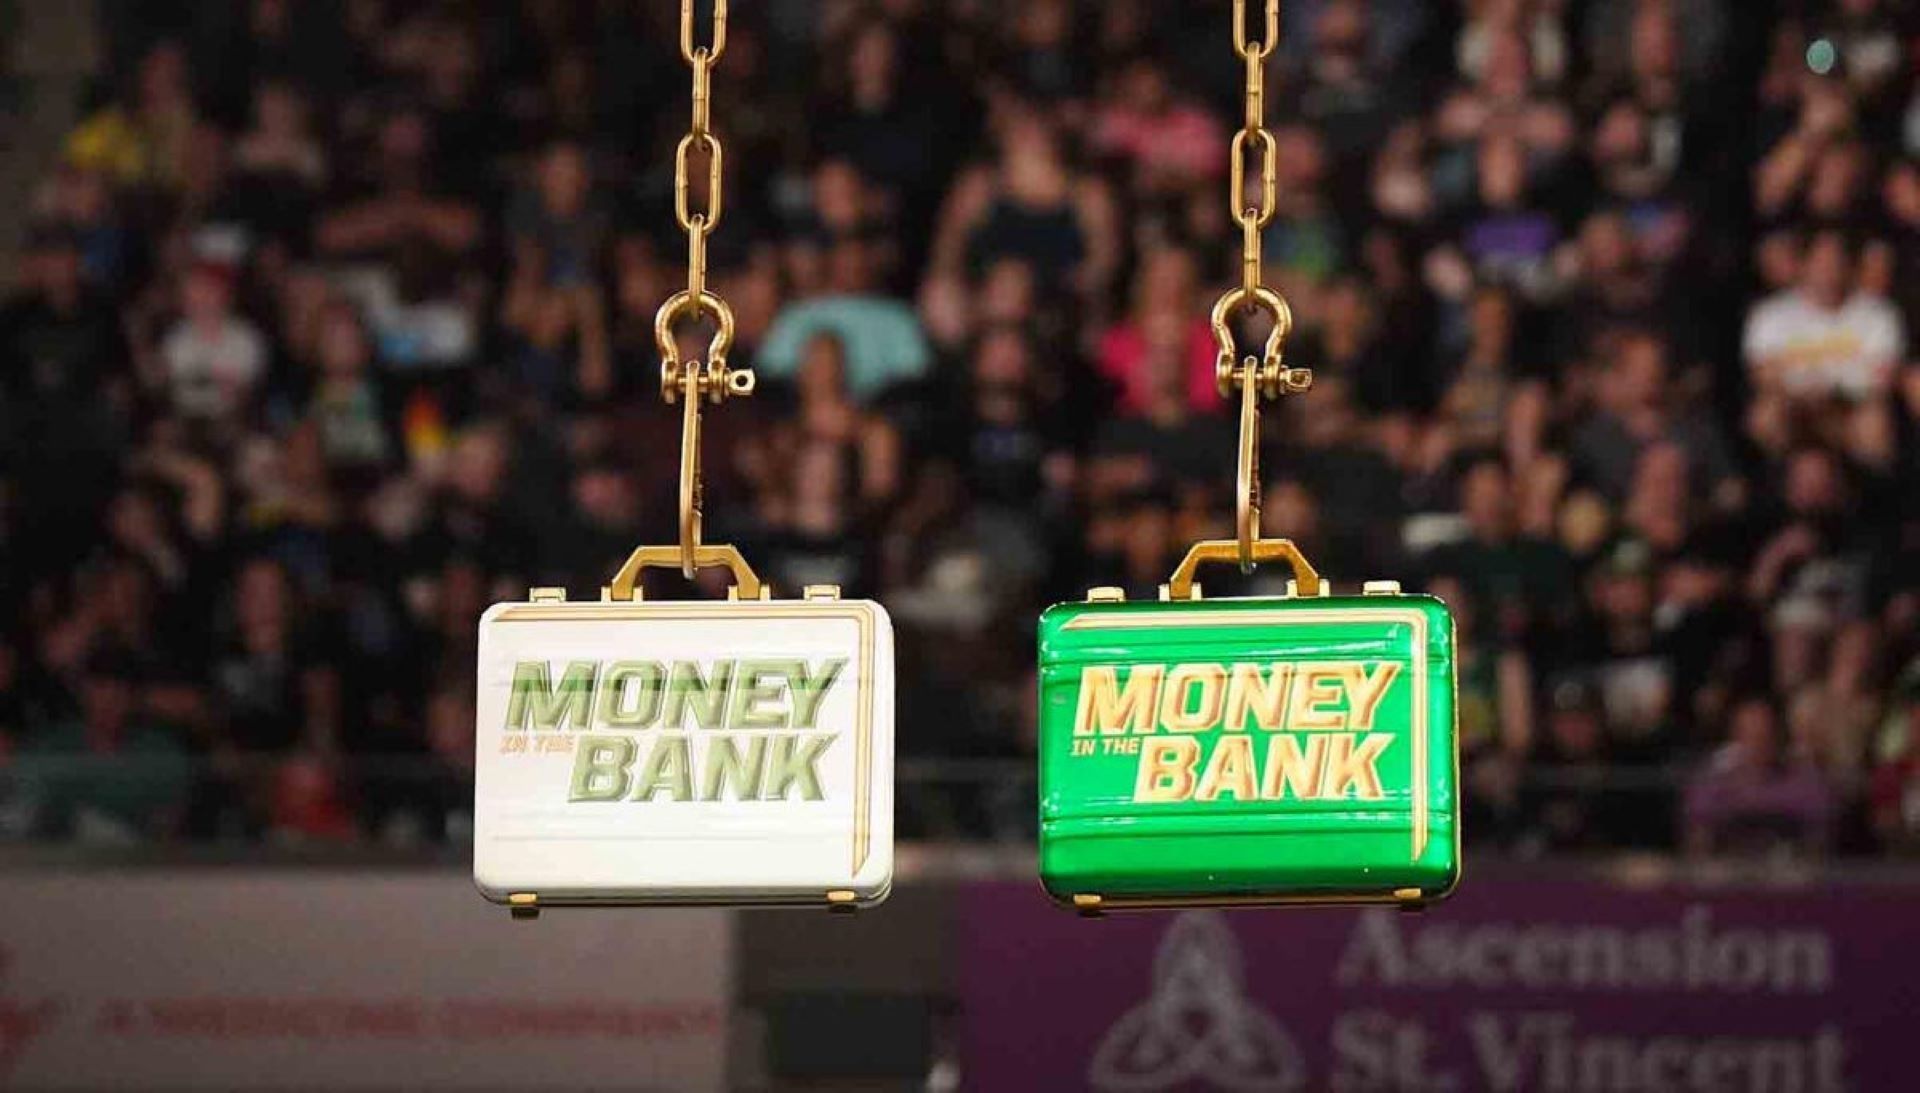 Some stars will see their fortunes changed at Money in the Bank in Toronto.